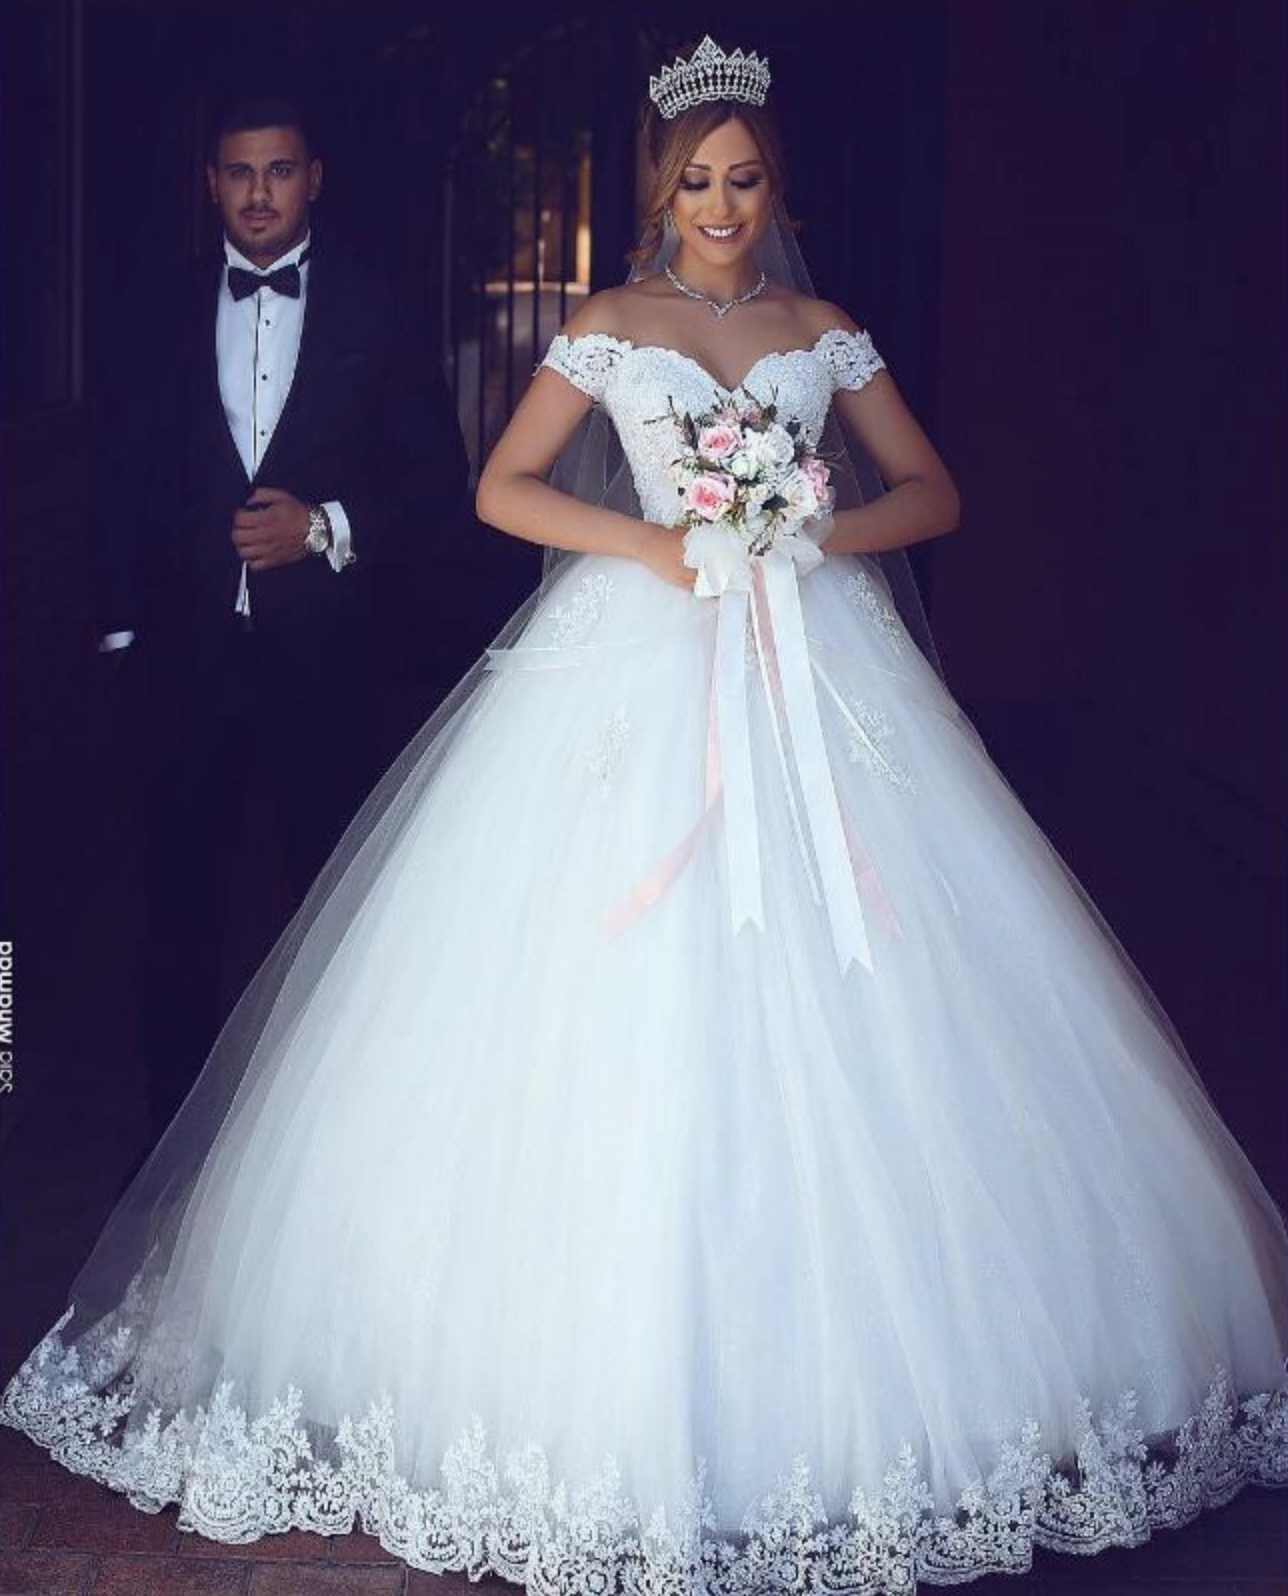 White Lace Appliques Ball Gown Wedding Dress With Off The Shoulder Sleeves - TulleLux Bridal Crowns &  Accessories 